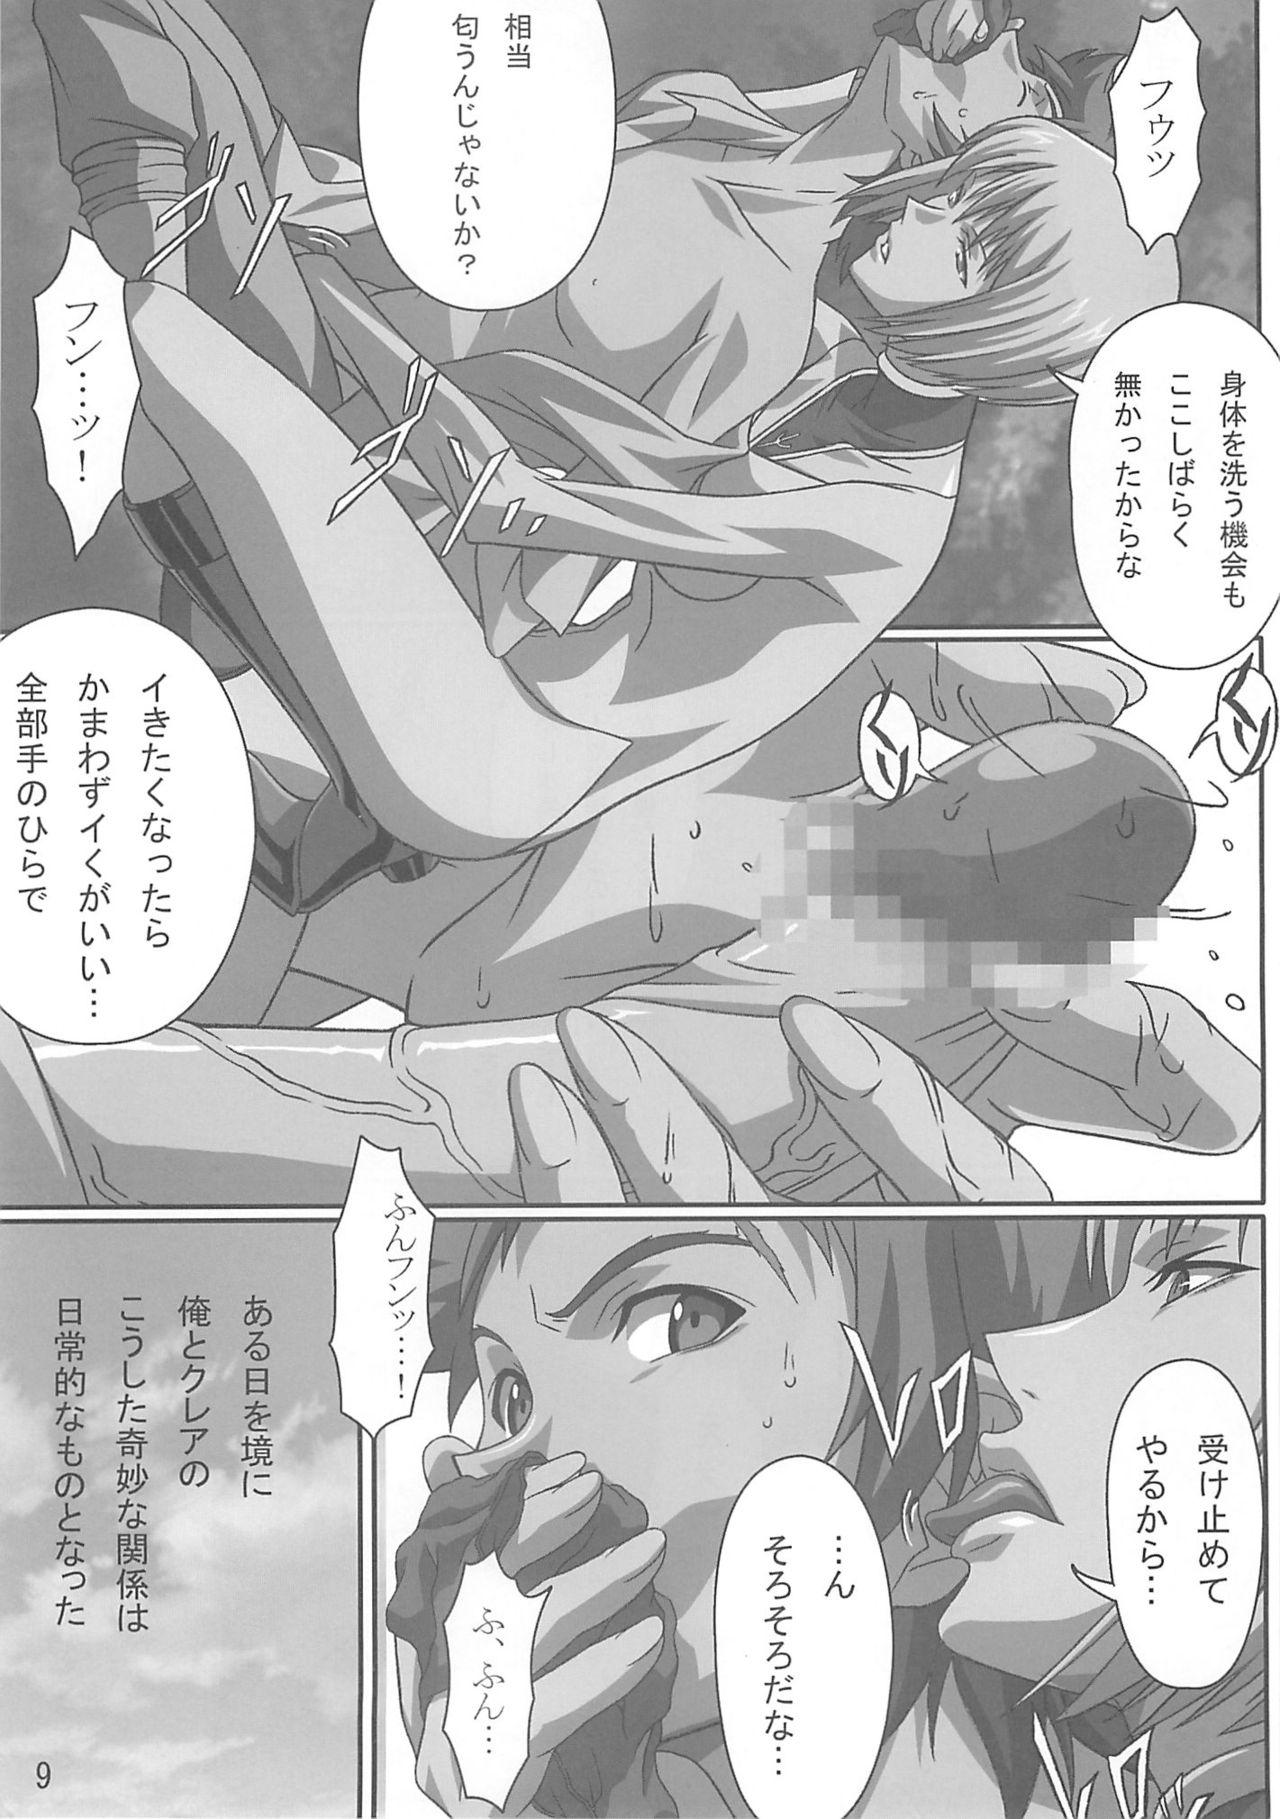 Kashima INDUSTRIAL - Claymore Licking - Page 8